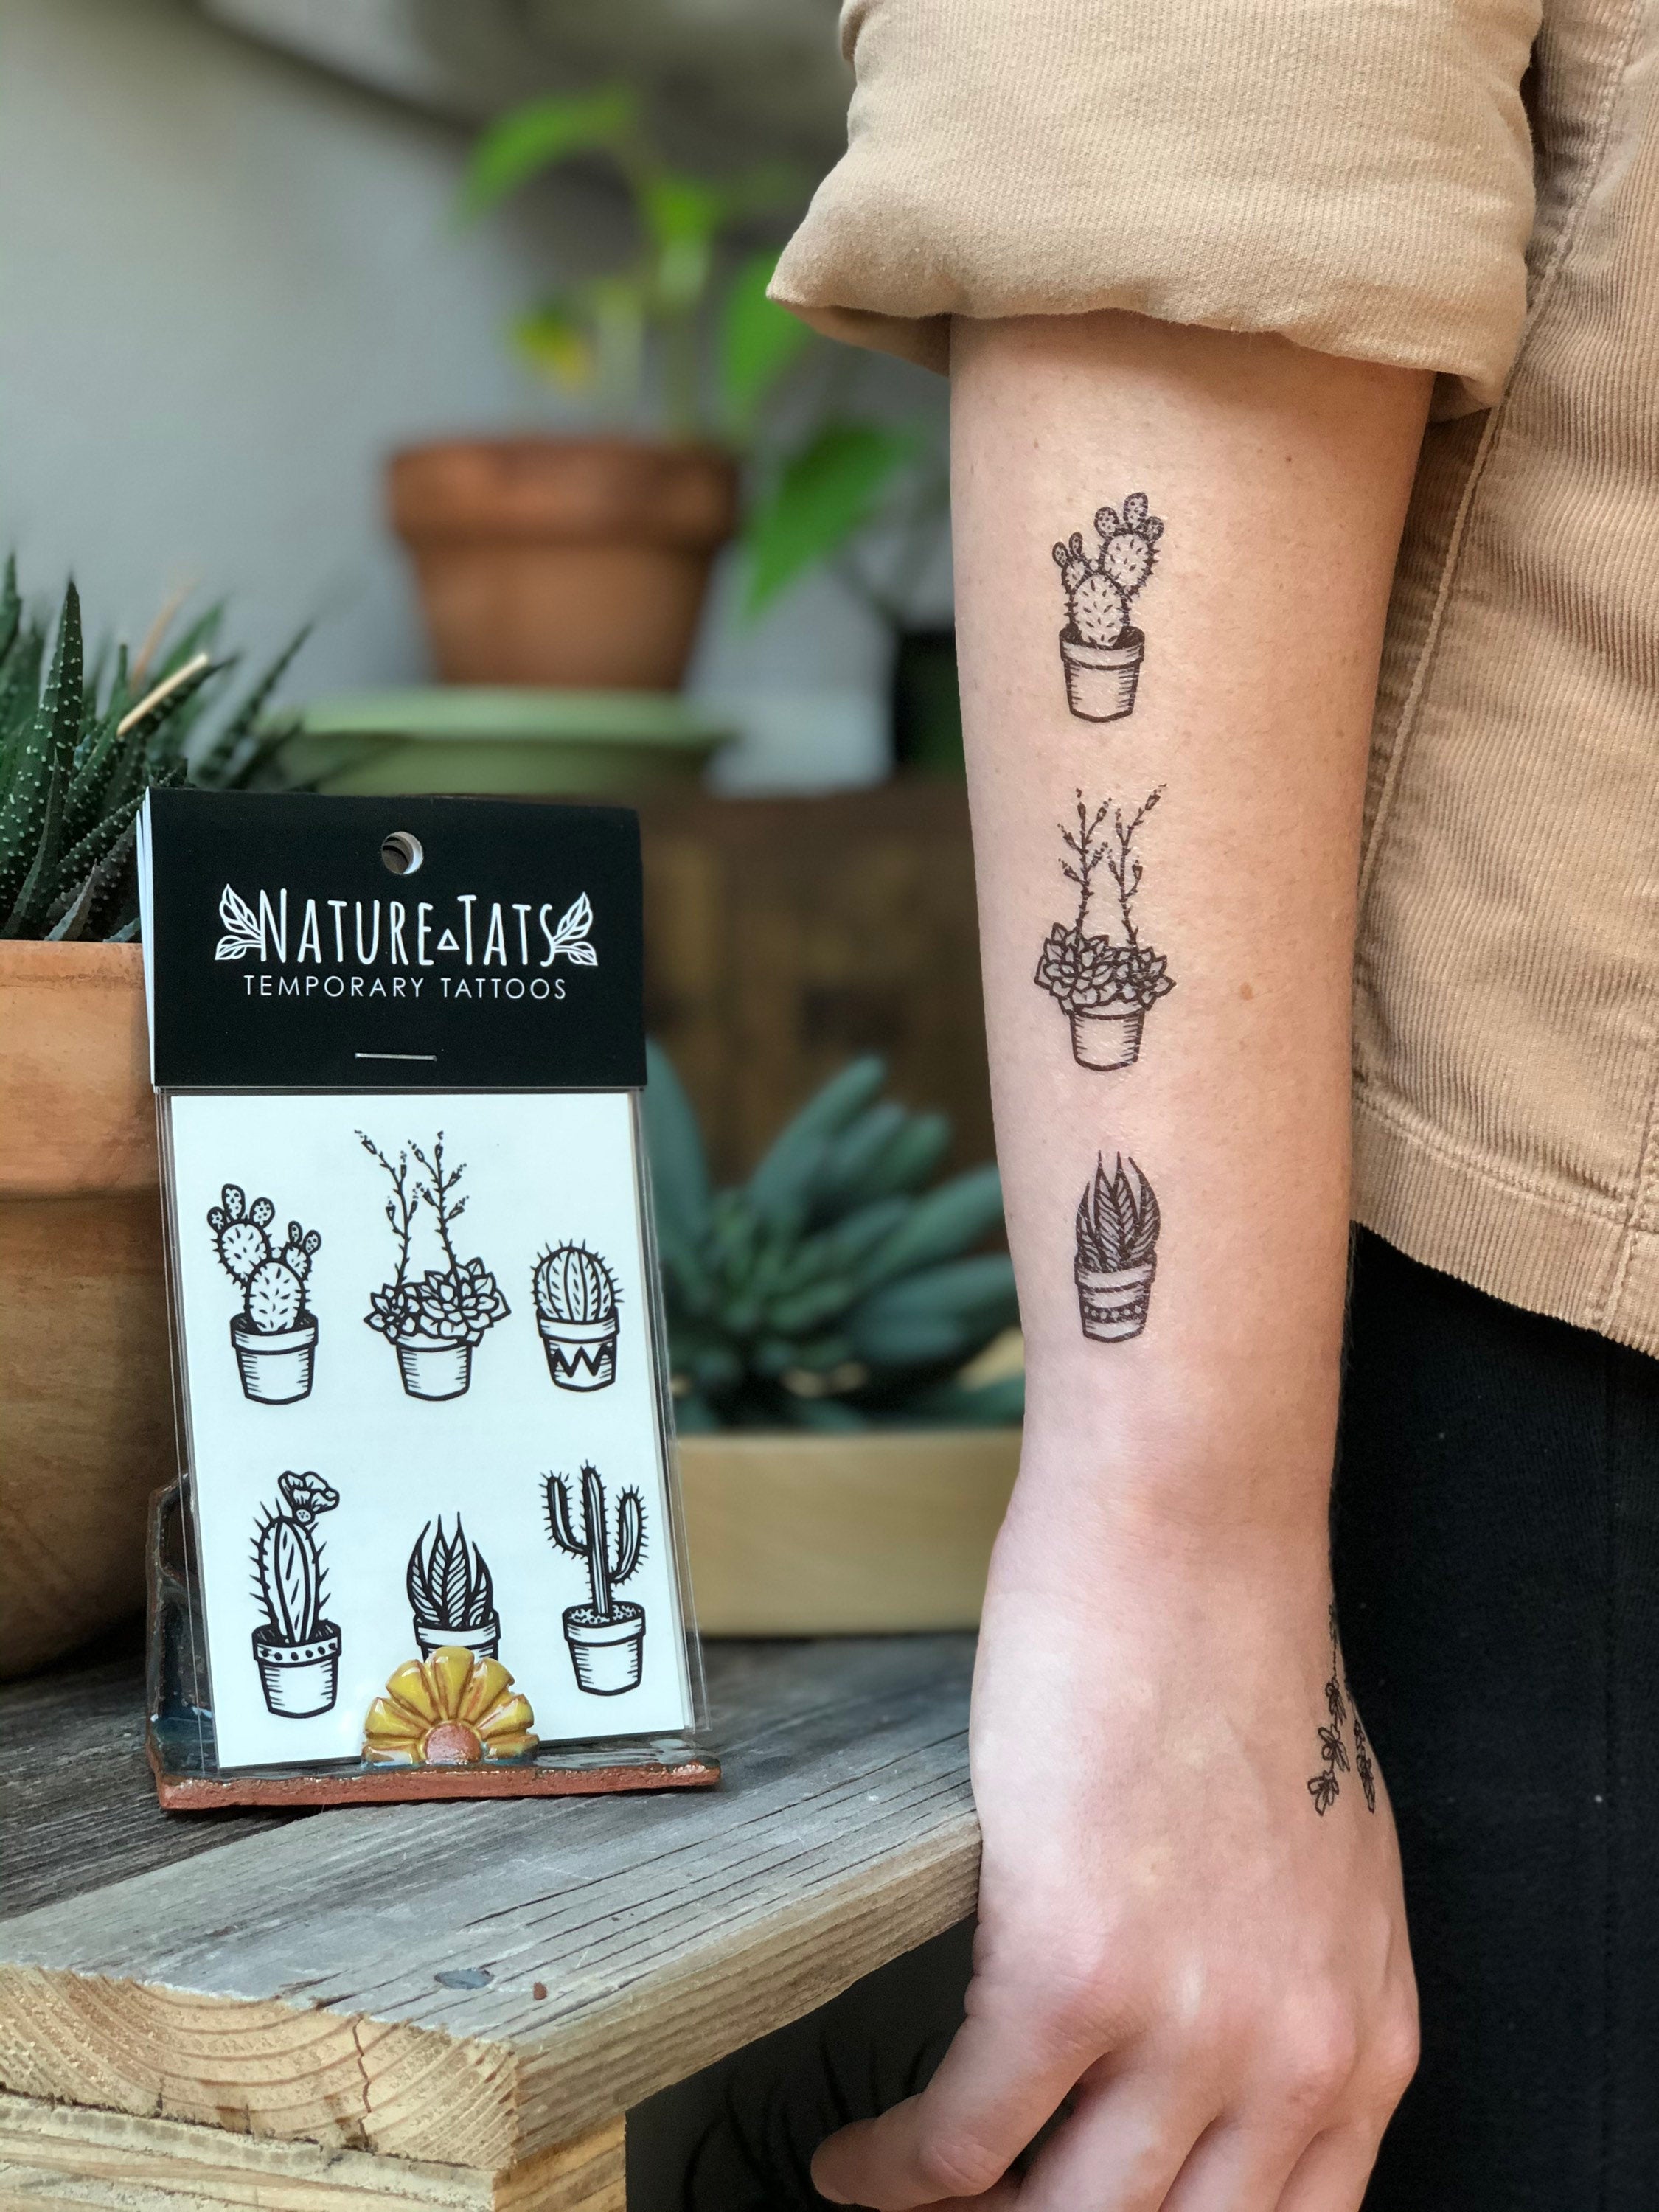 Cactus Tattoo Symbolism A Guide To Their Meanings